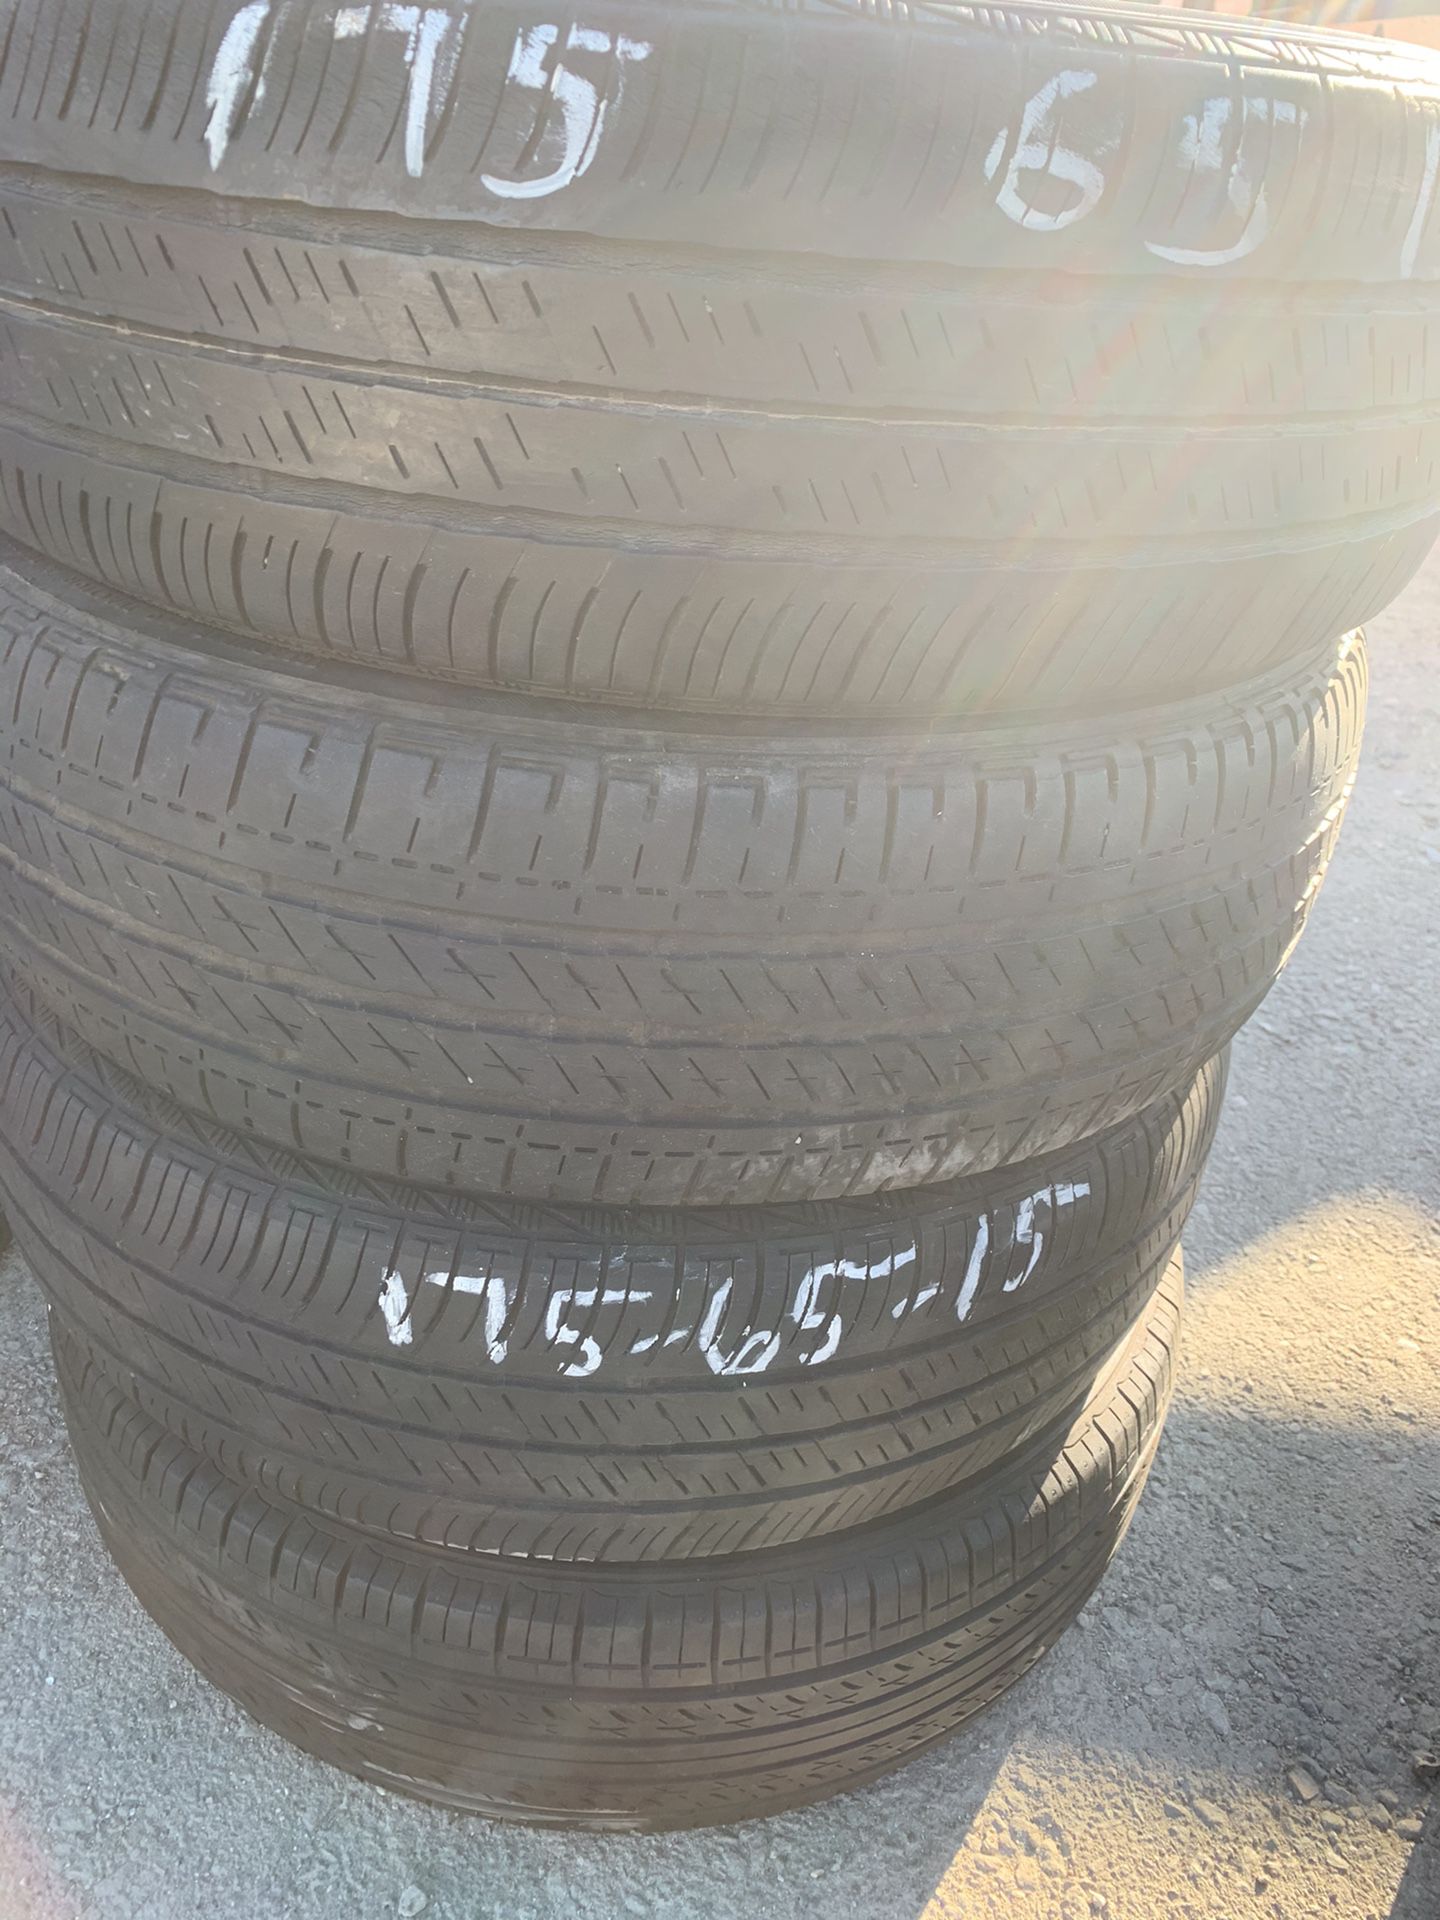 175-65-15 all four tires for $50 dollars